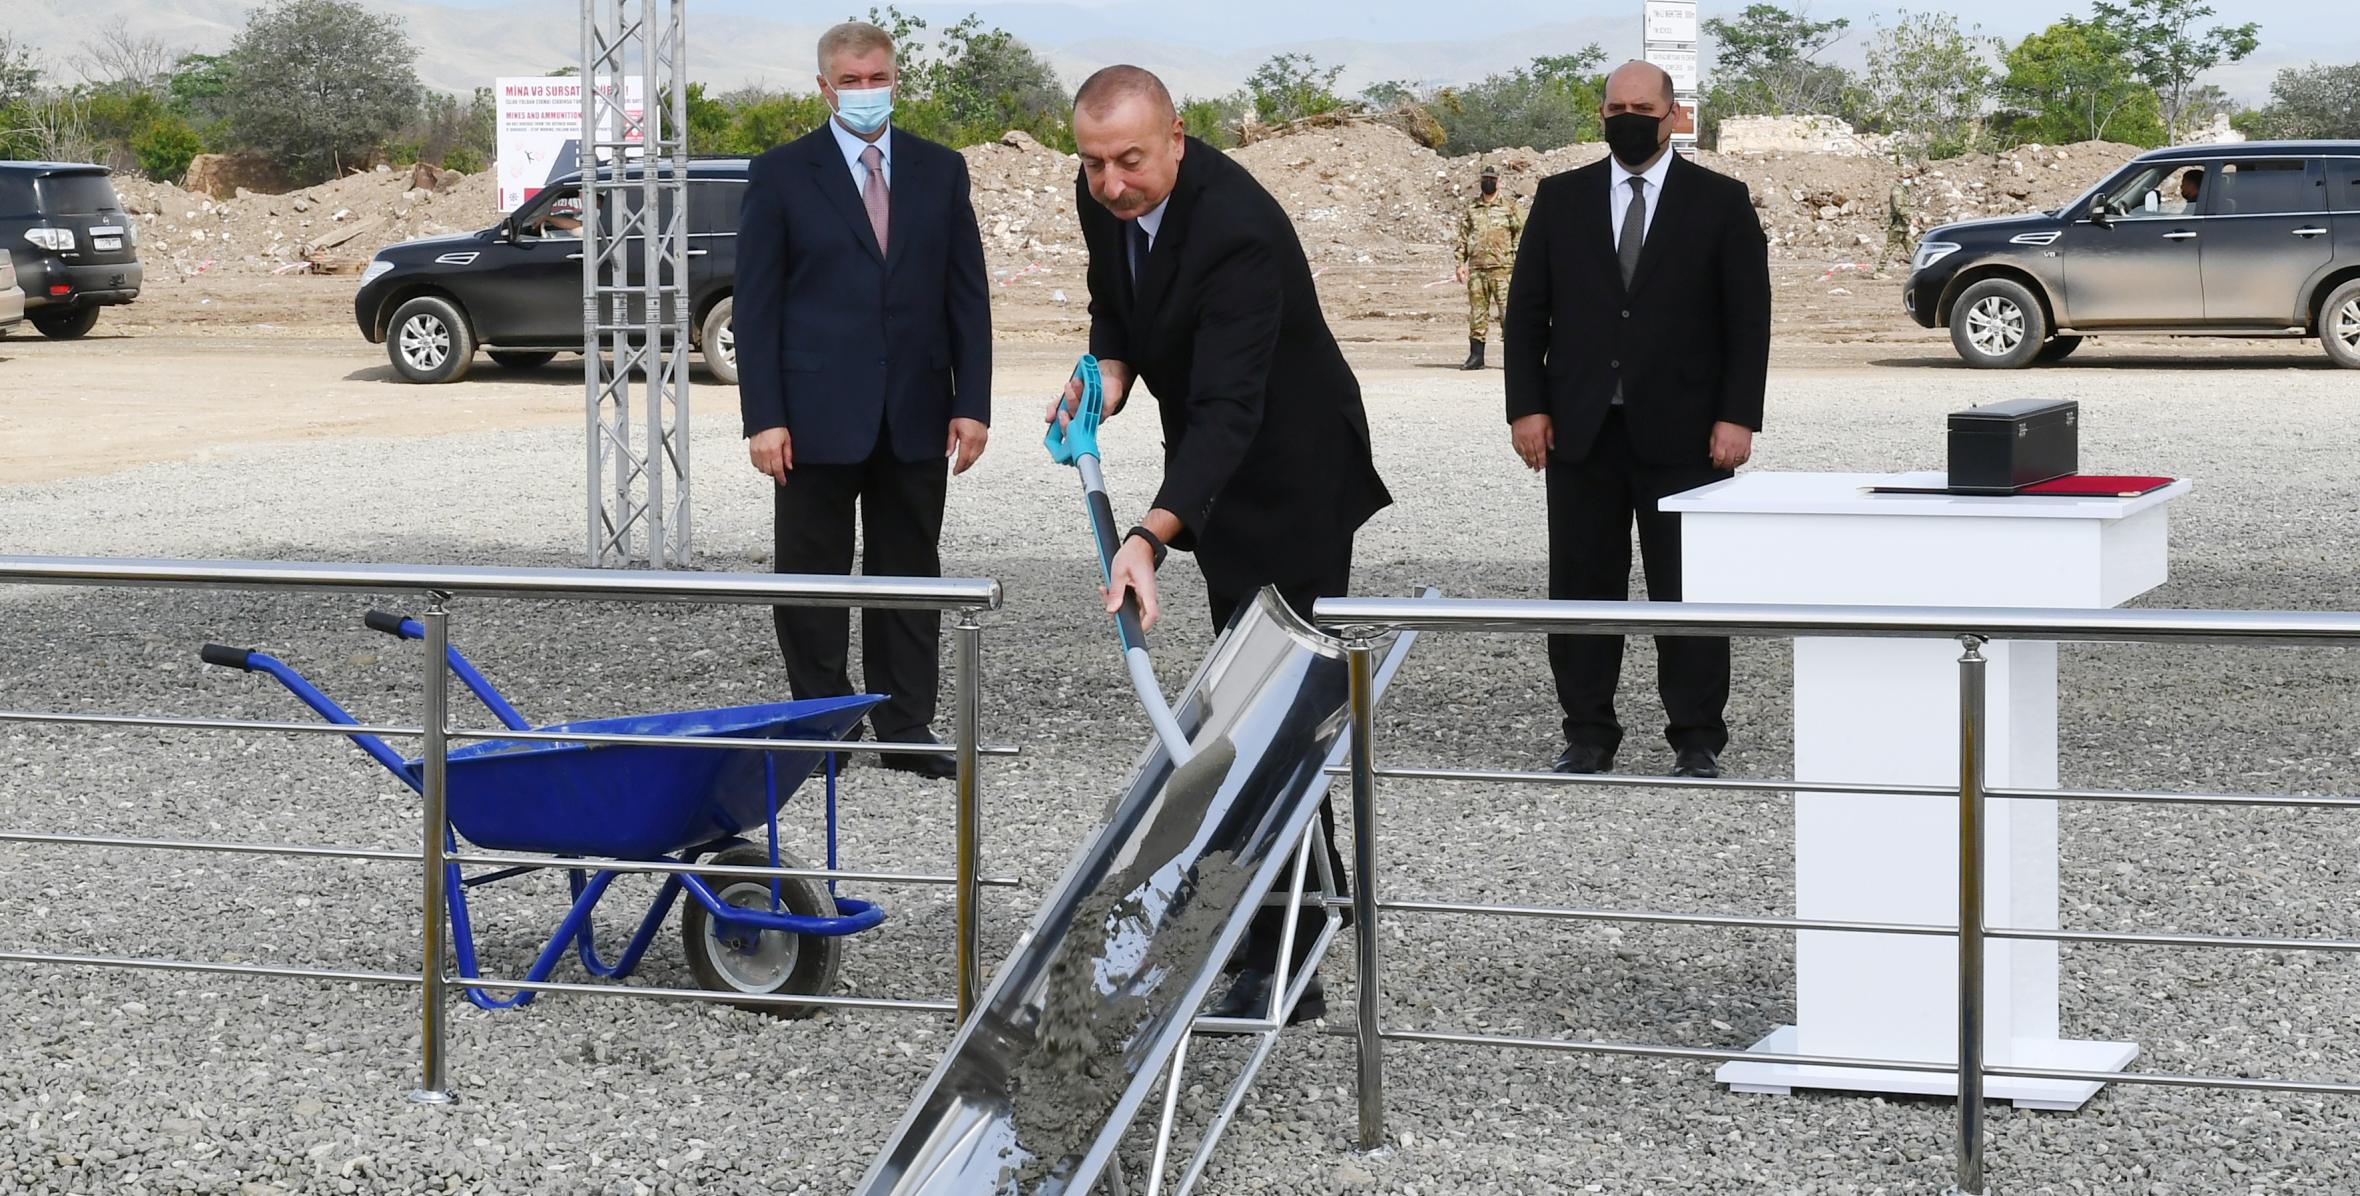 Ilham Aliyev has attended a groundbreaking ceremony for the first residential building to be built in the city of Aghdam